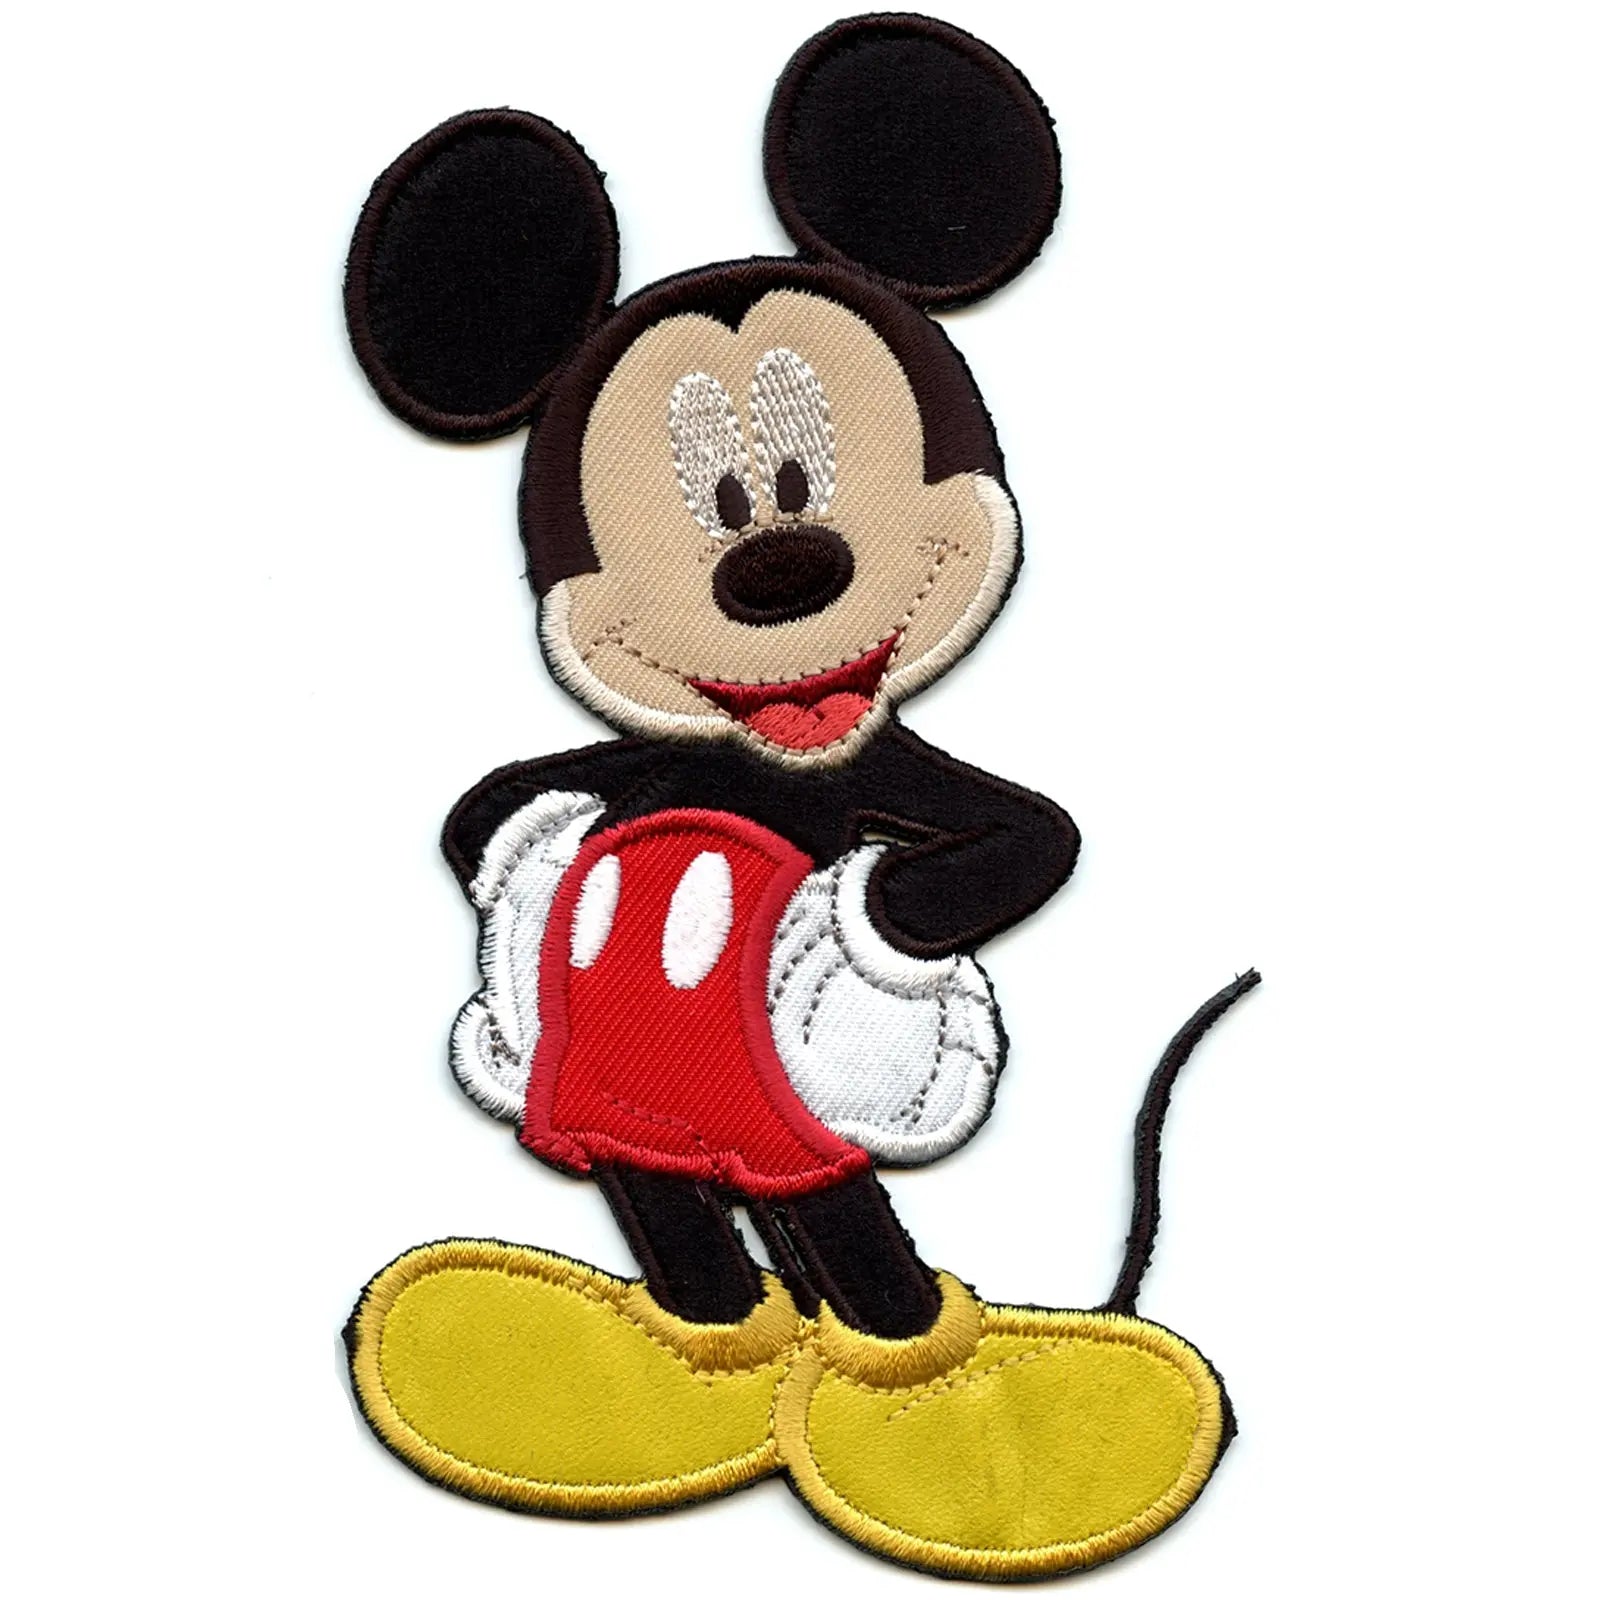 Iron on patches - Mickey Mouse 90 Years 02 Mickey nineties special Edition  Disney - red - 6,5 x 6,5 cm - Application Embroided badges | Catch the